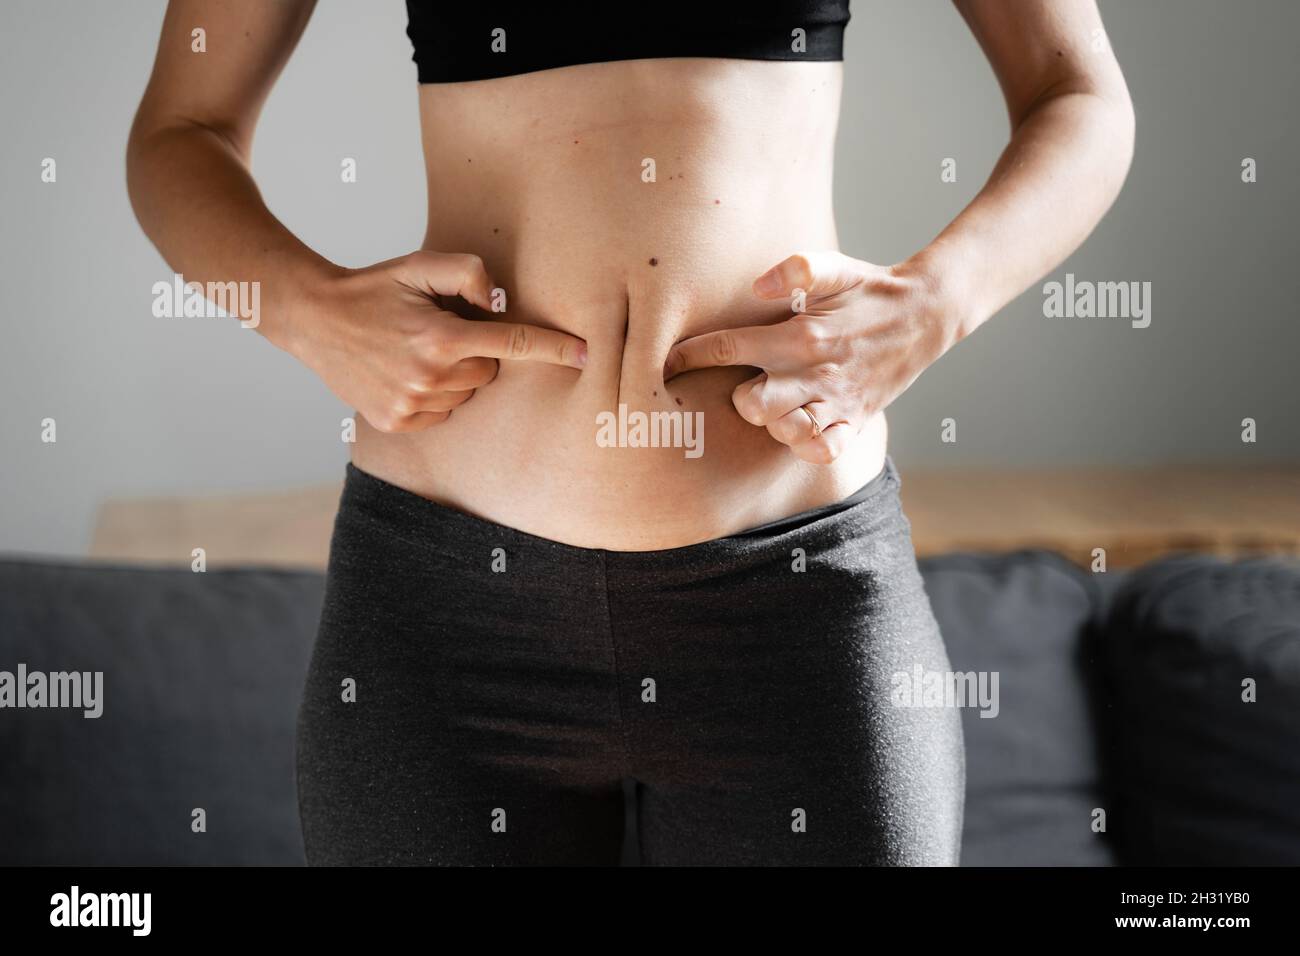 Young woman at home holding belly fat with hands. Body neutrality concept. Accepting the body and weight. Unhealthy carb eating. Stock Photo